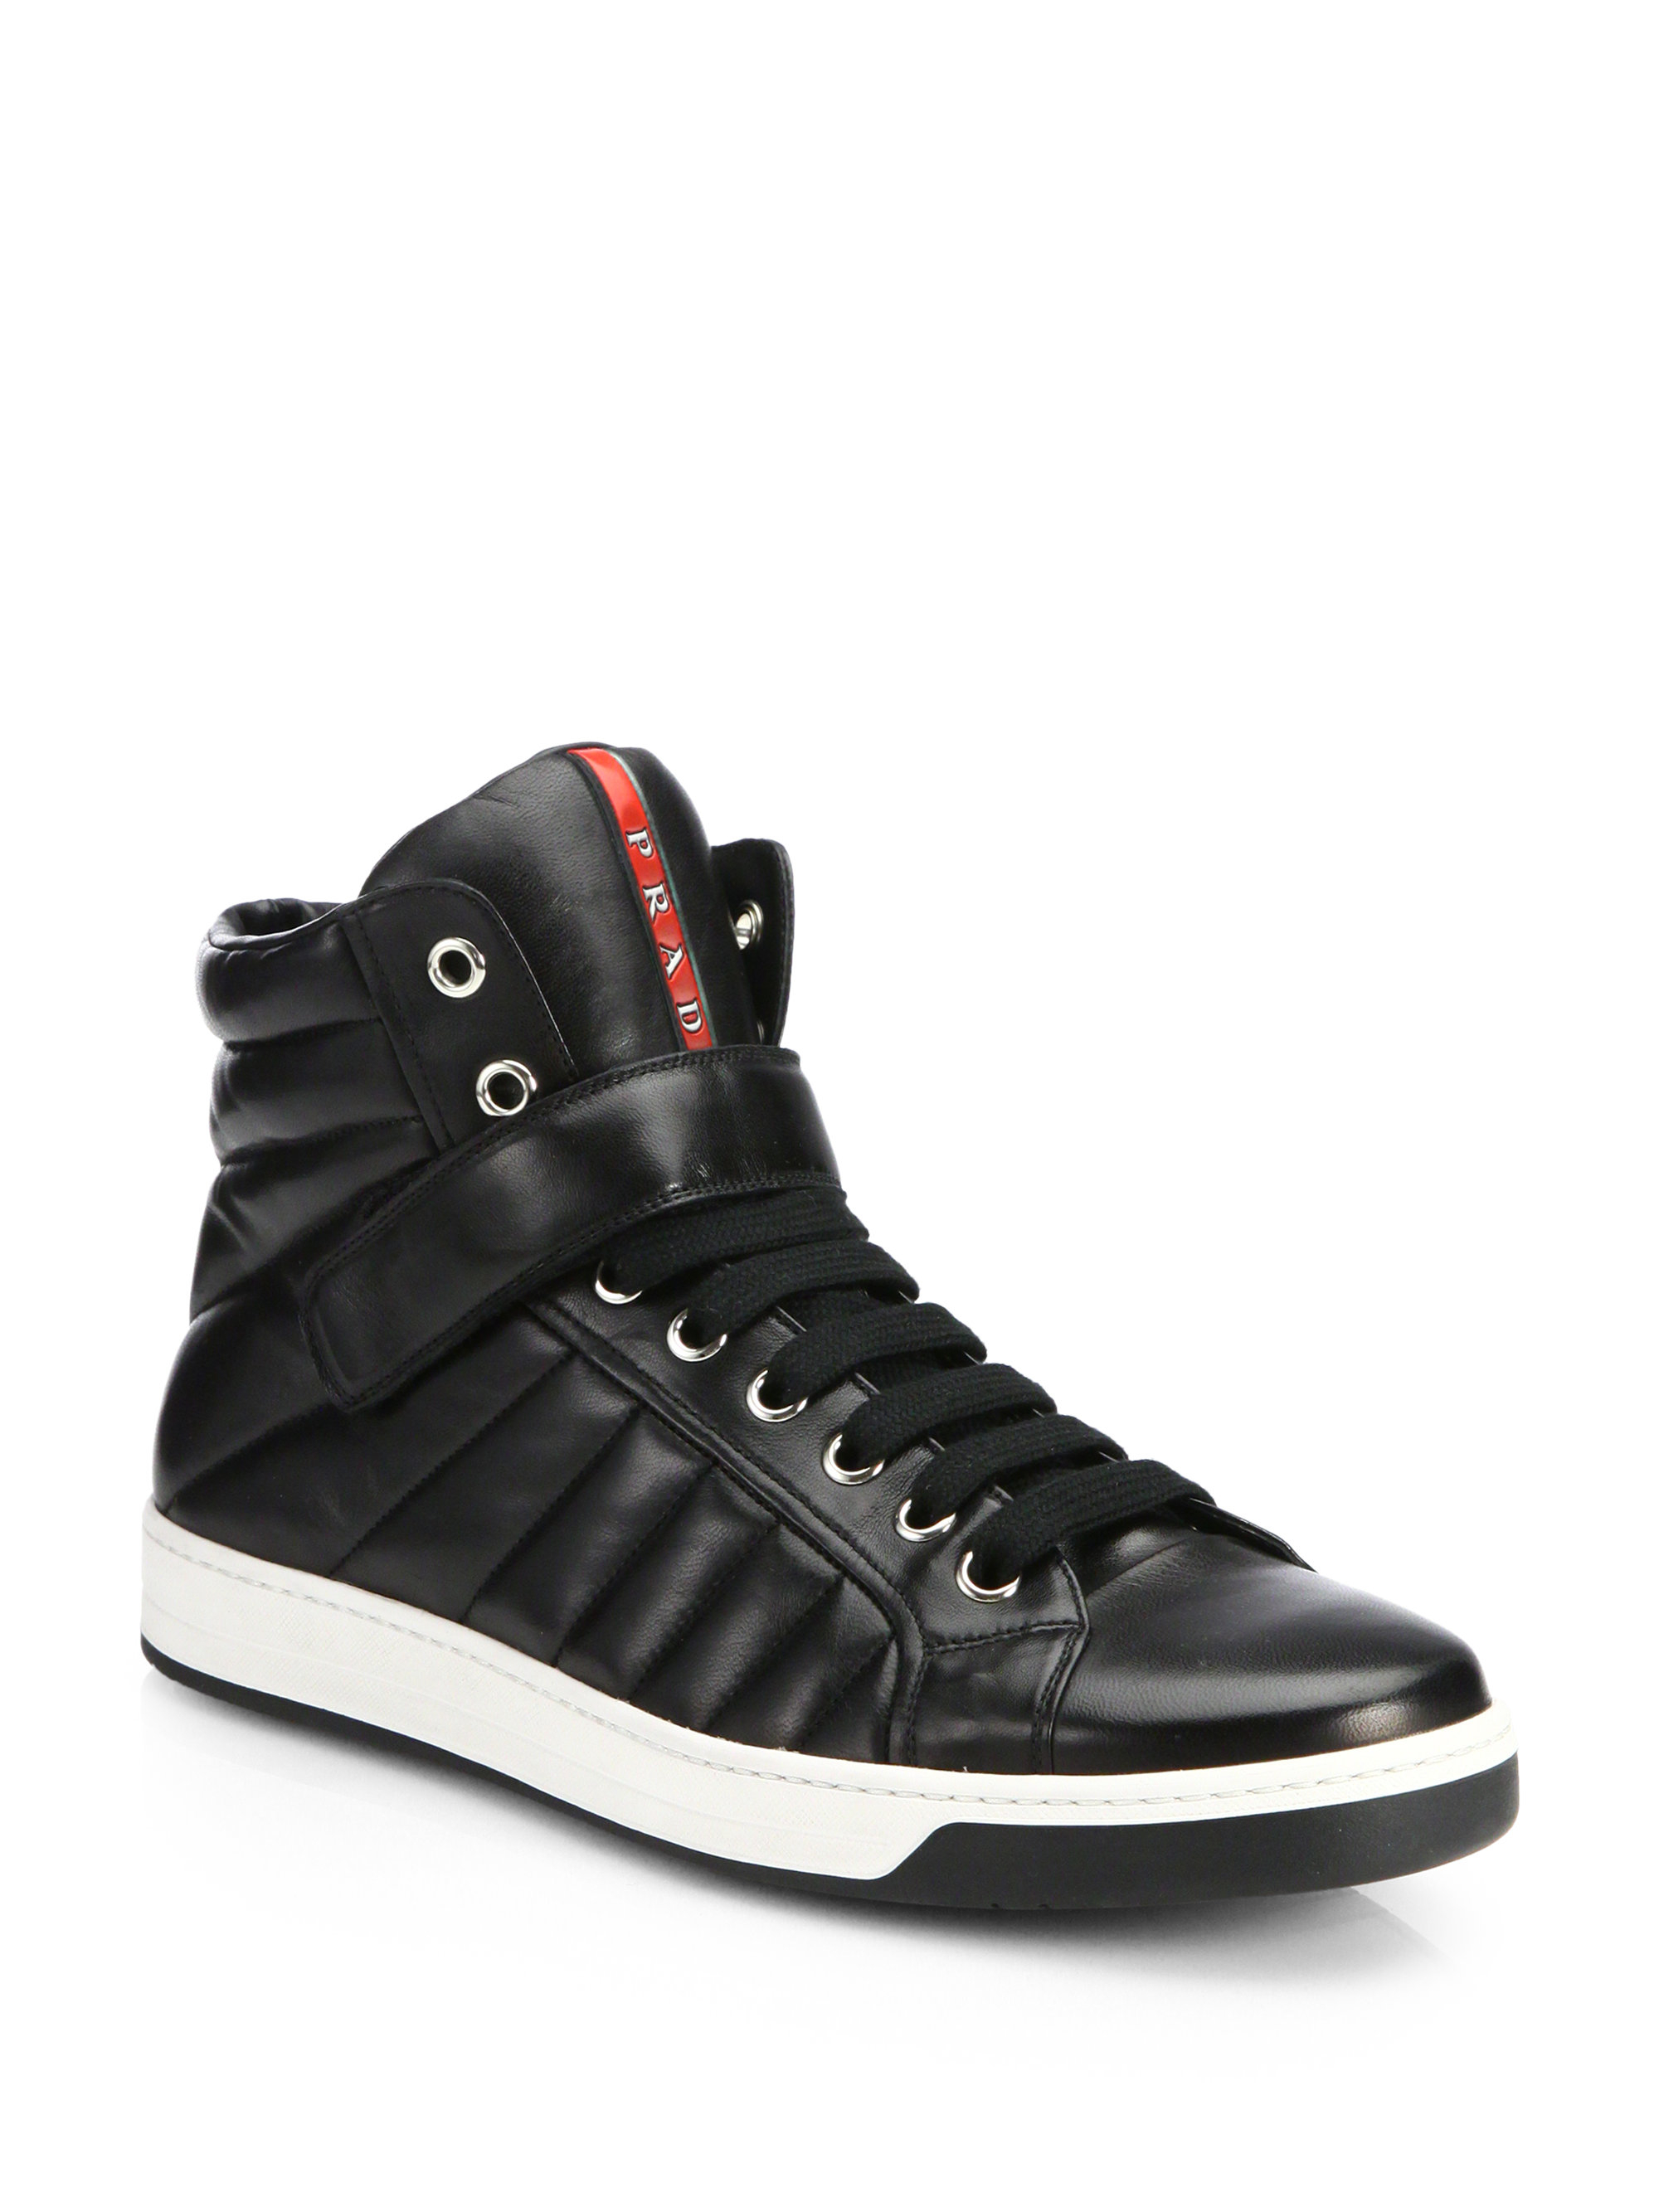 Black Leather High Top Sneakers Mens